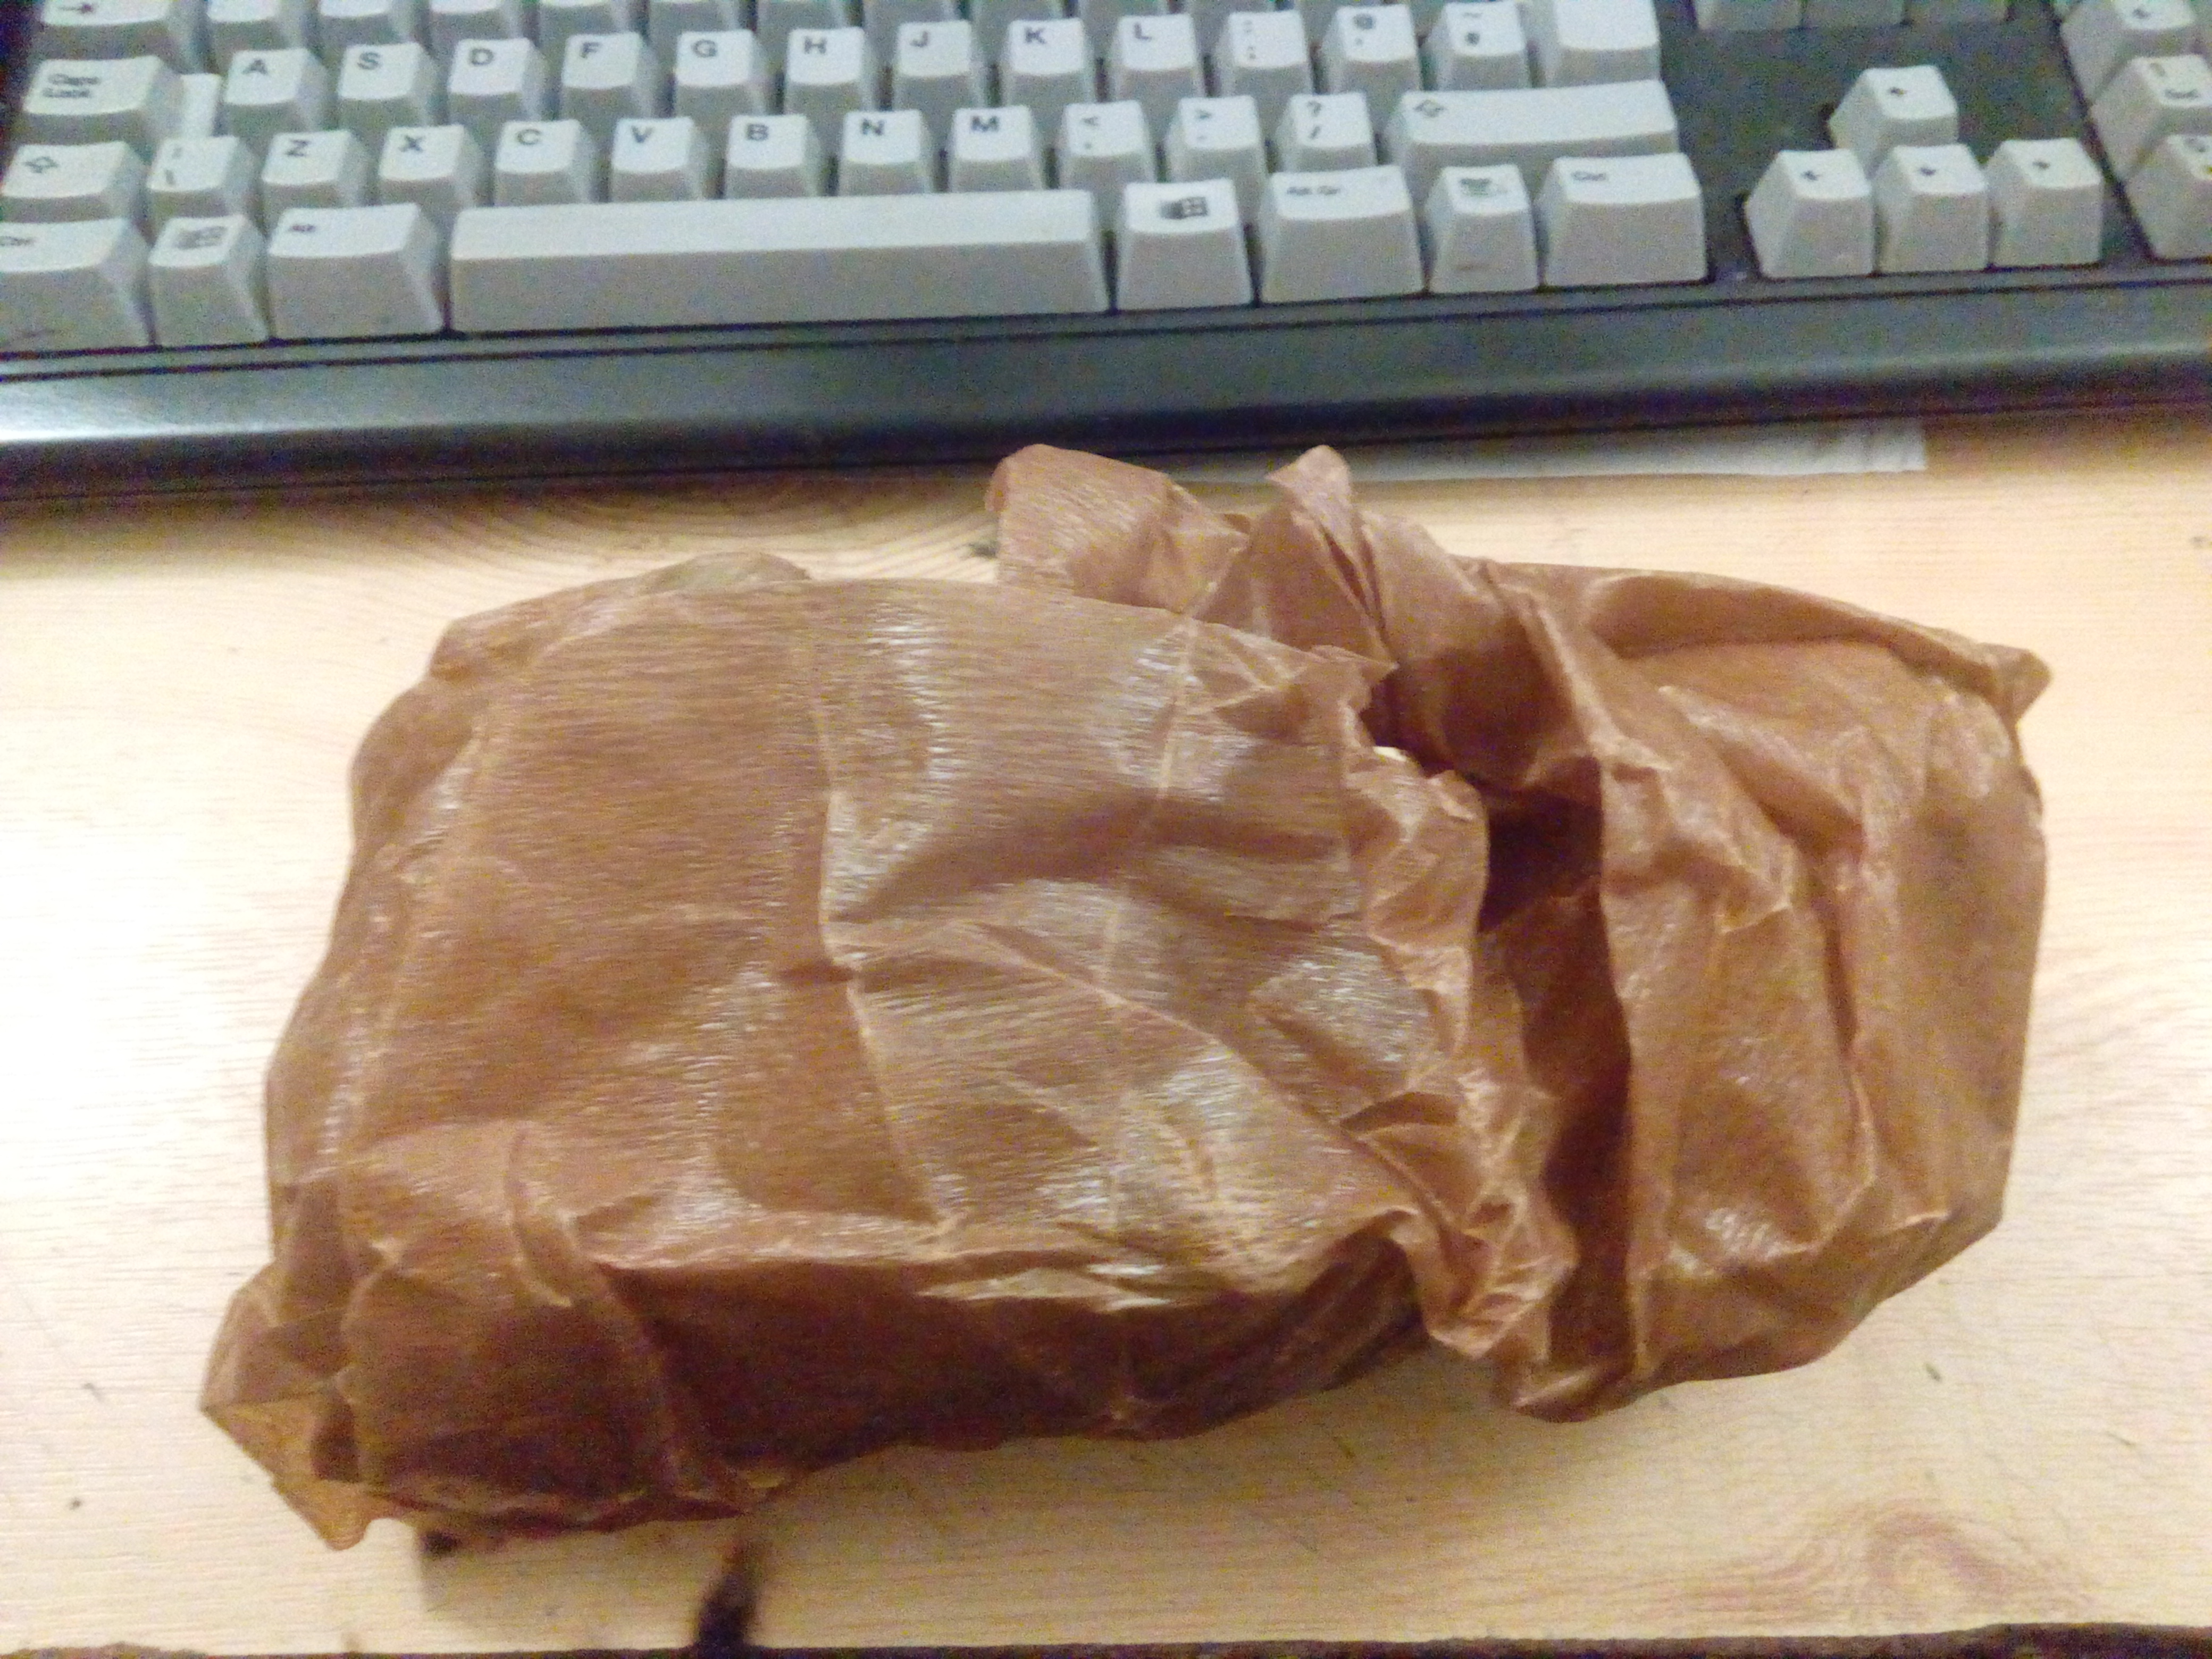 Photograph of an item wrapped in brown waxed anti-corrosion paper.